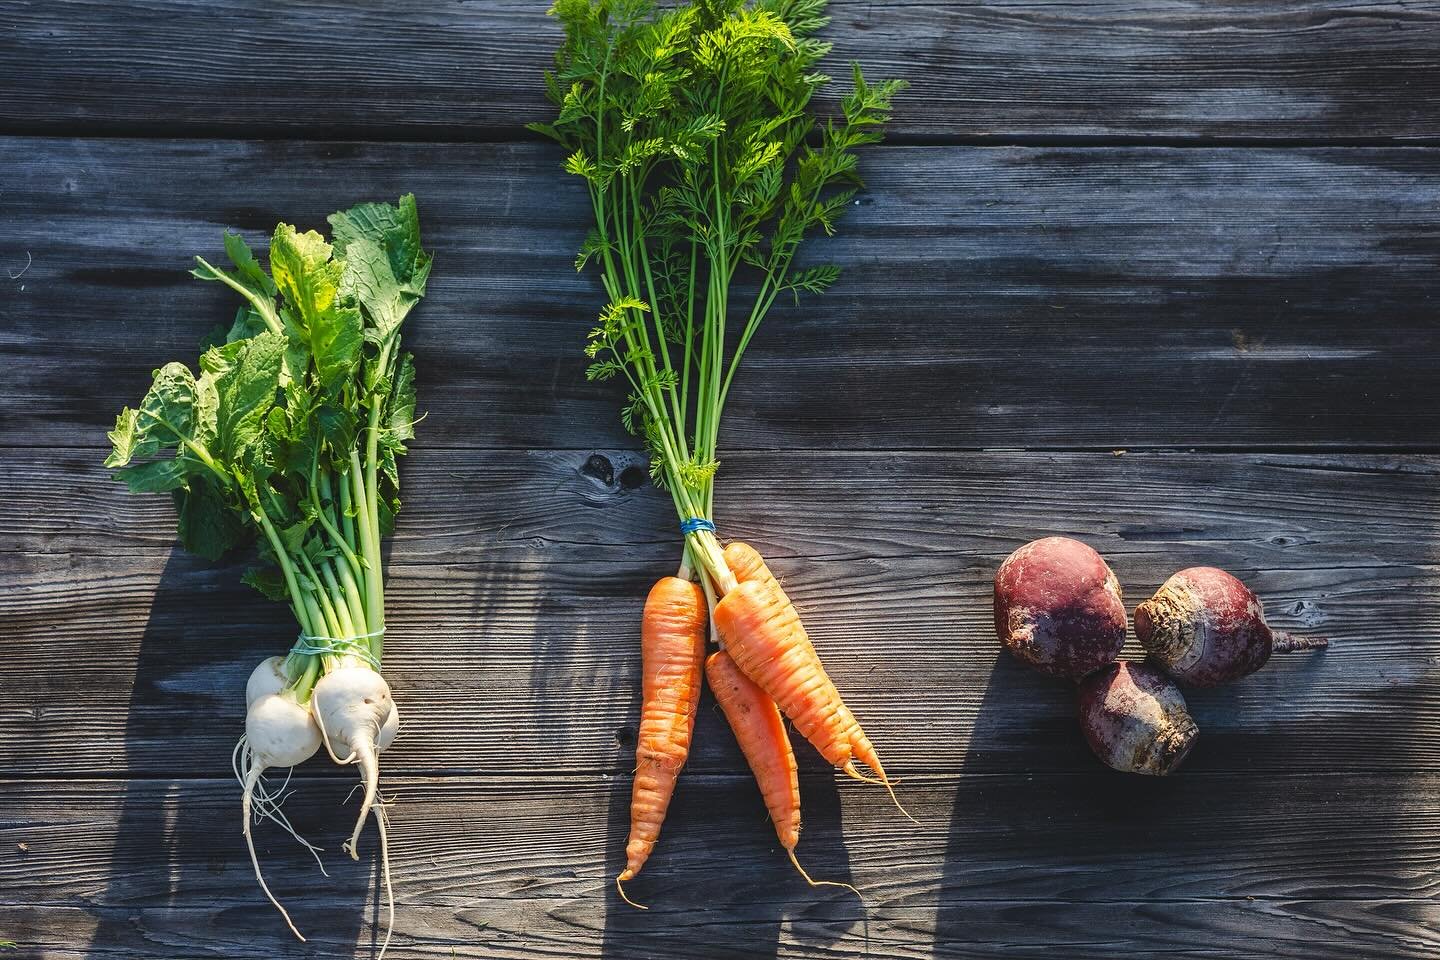 Let&rsquo;s talk about root veggies and their greens! Have you ever wondered why root veggies sometimes come with their greens and other times without? Some fruits &amp; veggies need to be eaten fairly quickly after harvest, but others store well and